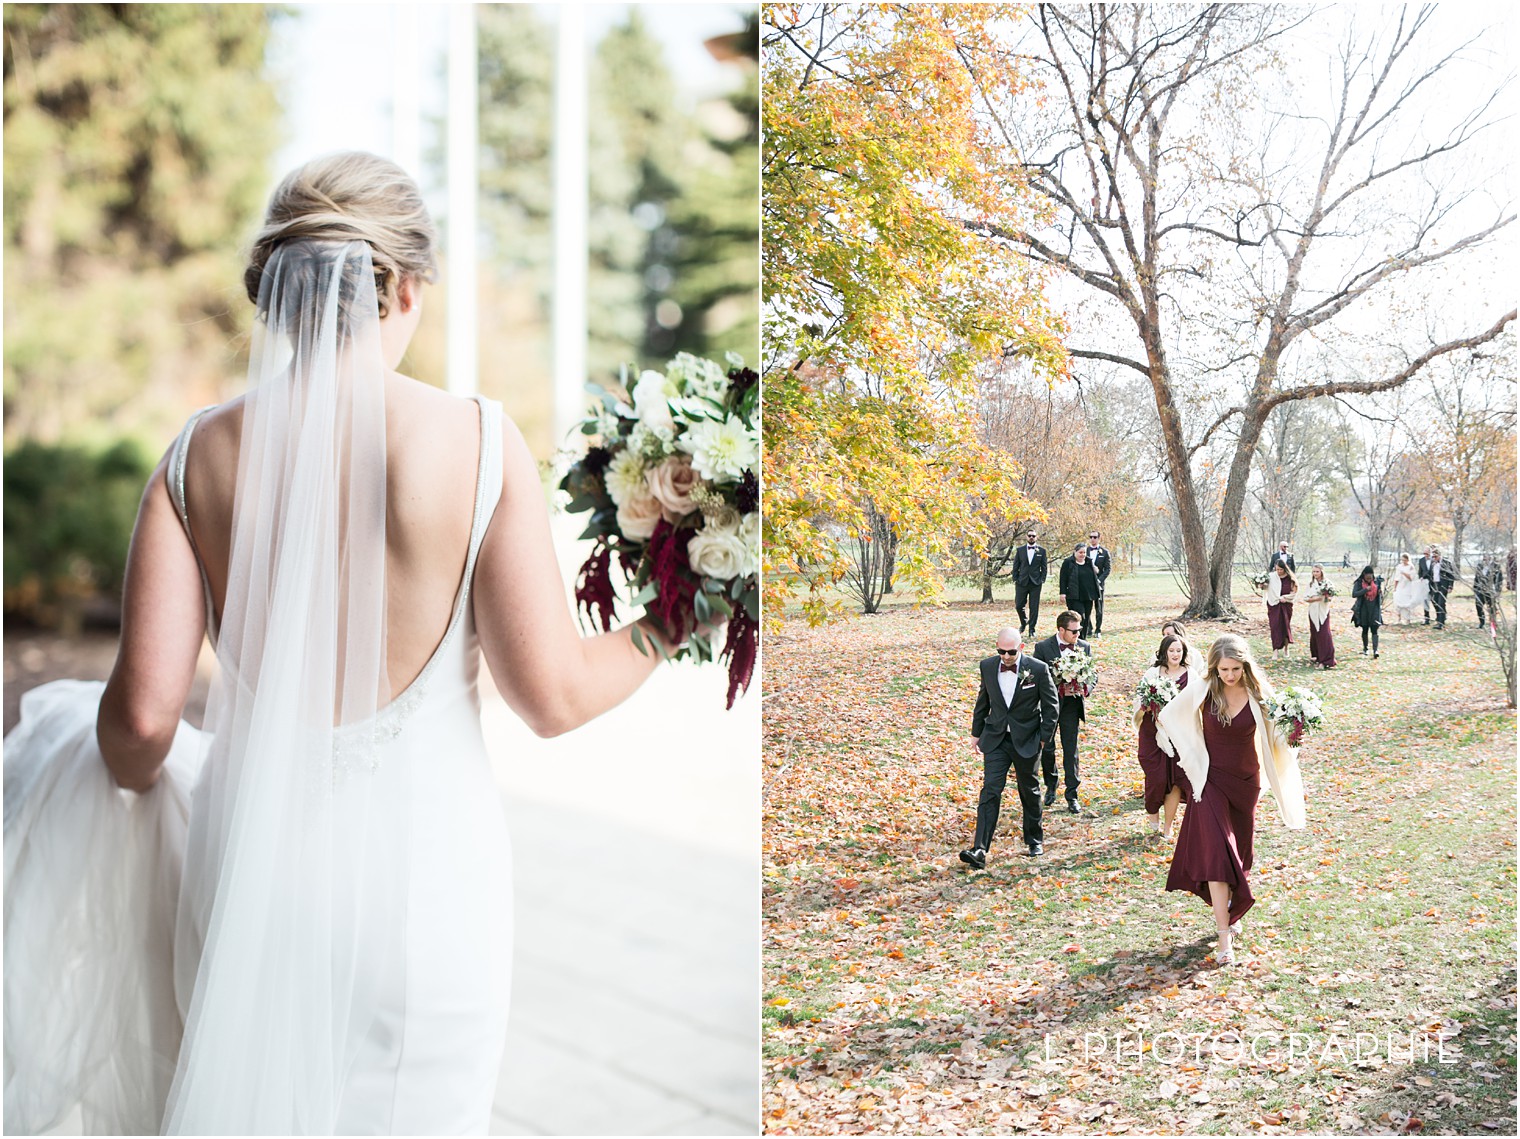 612 North,Four Seasons,Kate Hayes,L Photographie,L Photographie weddings,Midwest wedding photographer,October wedding,Old Cathedral,St. Louis wedding,St. Louis wedding photographer,St. Louis wedding photography,burgundy bridesmaid dress,fall wedding,first look,